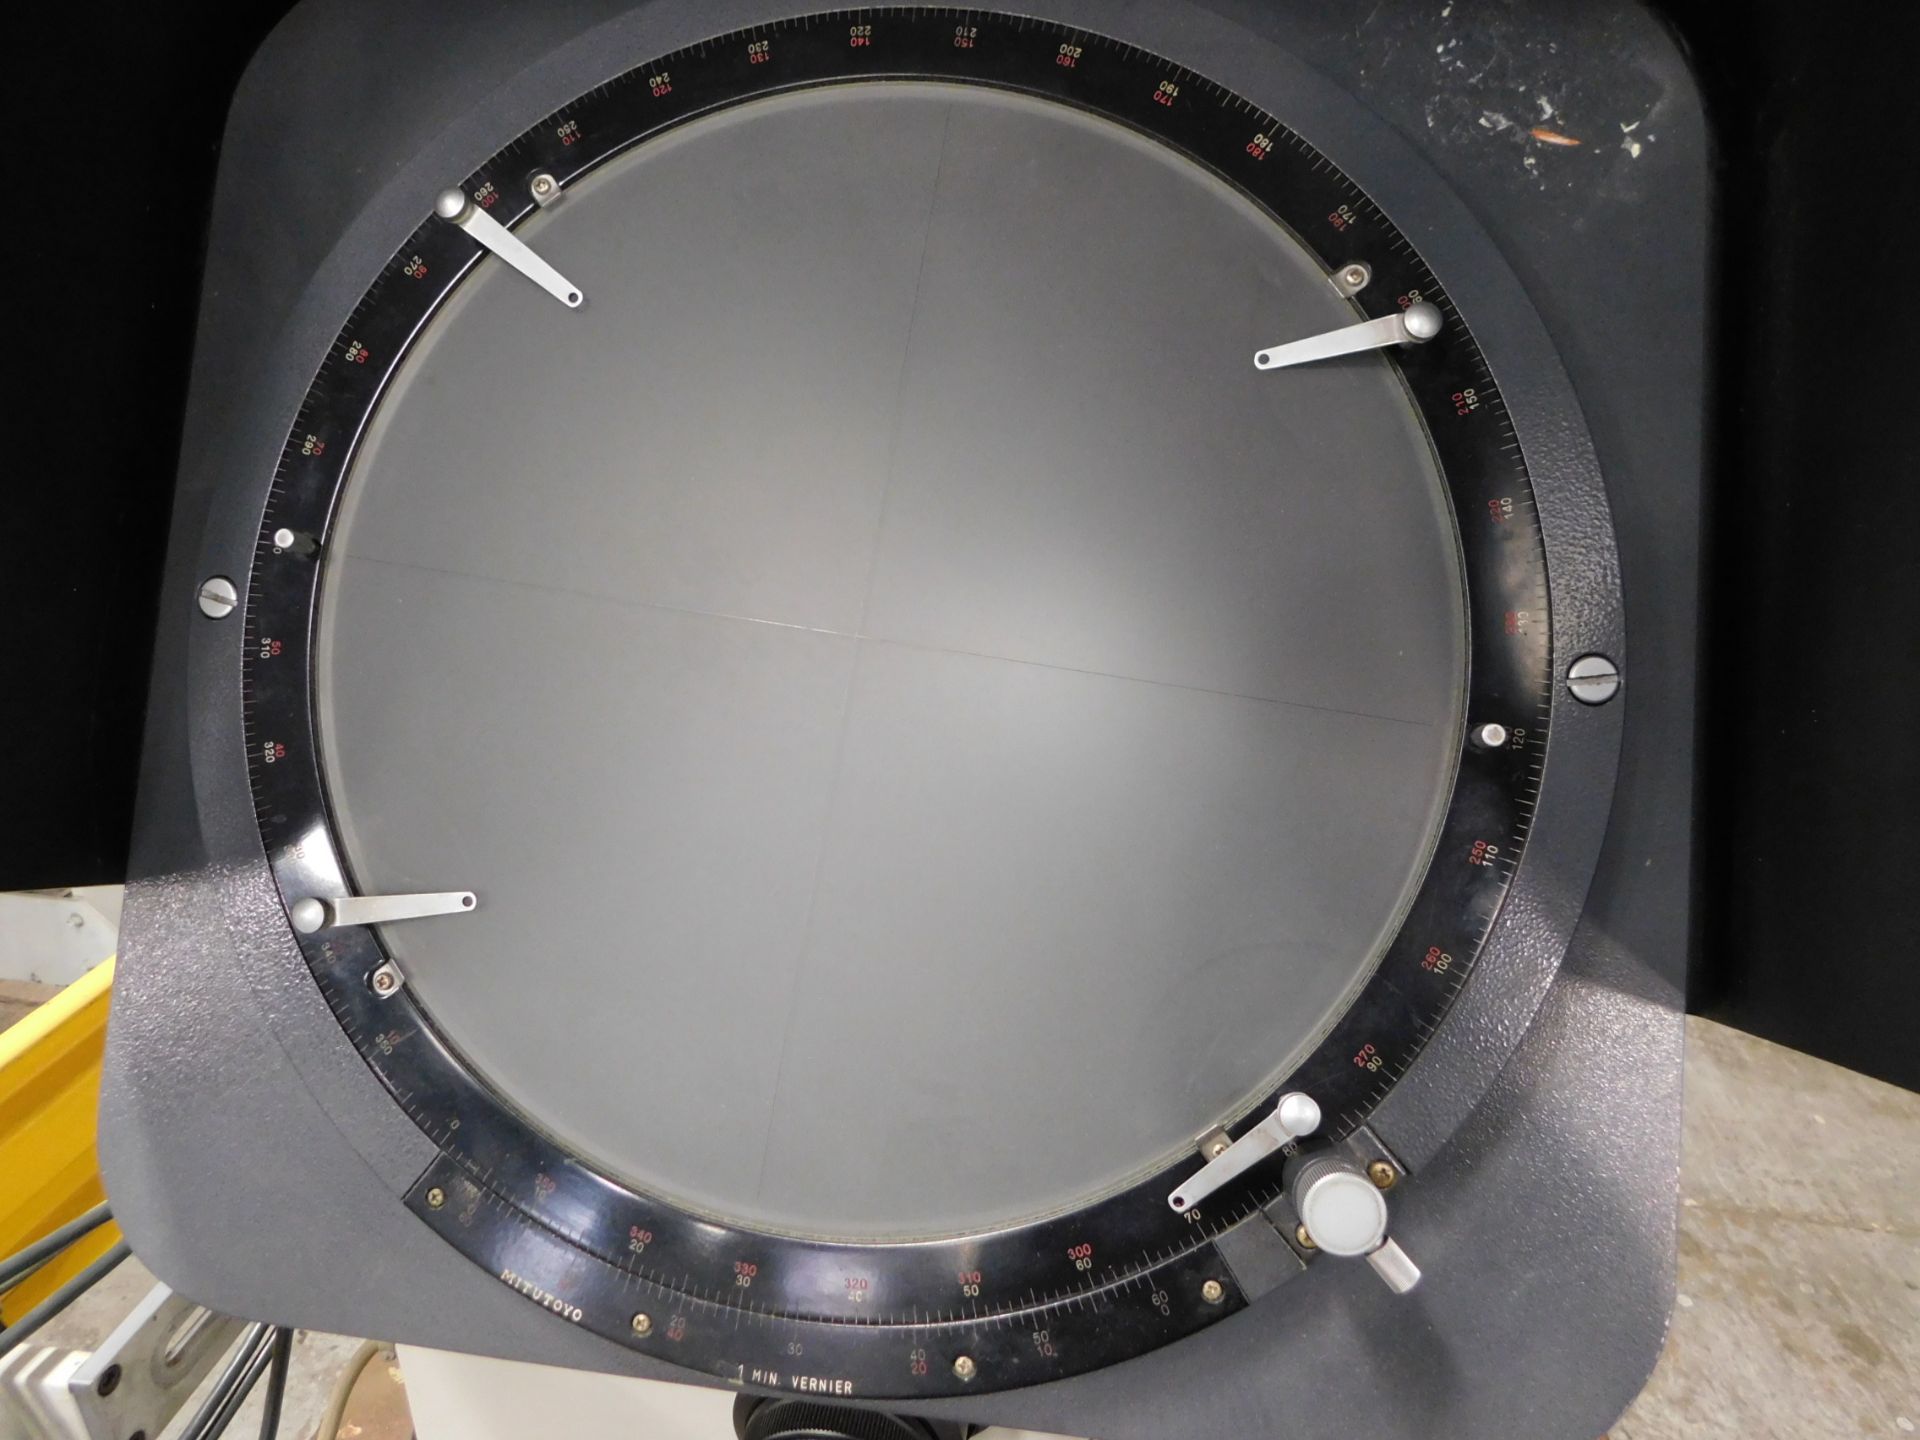 Mitutoyo Model PH-350 Optical Comparator, 14 Inch, s/n 021, Surface Illumination - Image 11 of 11